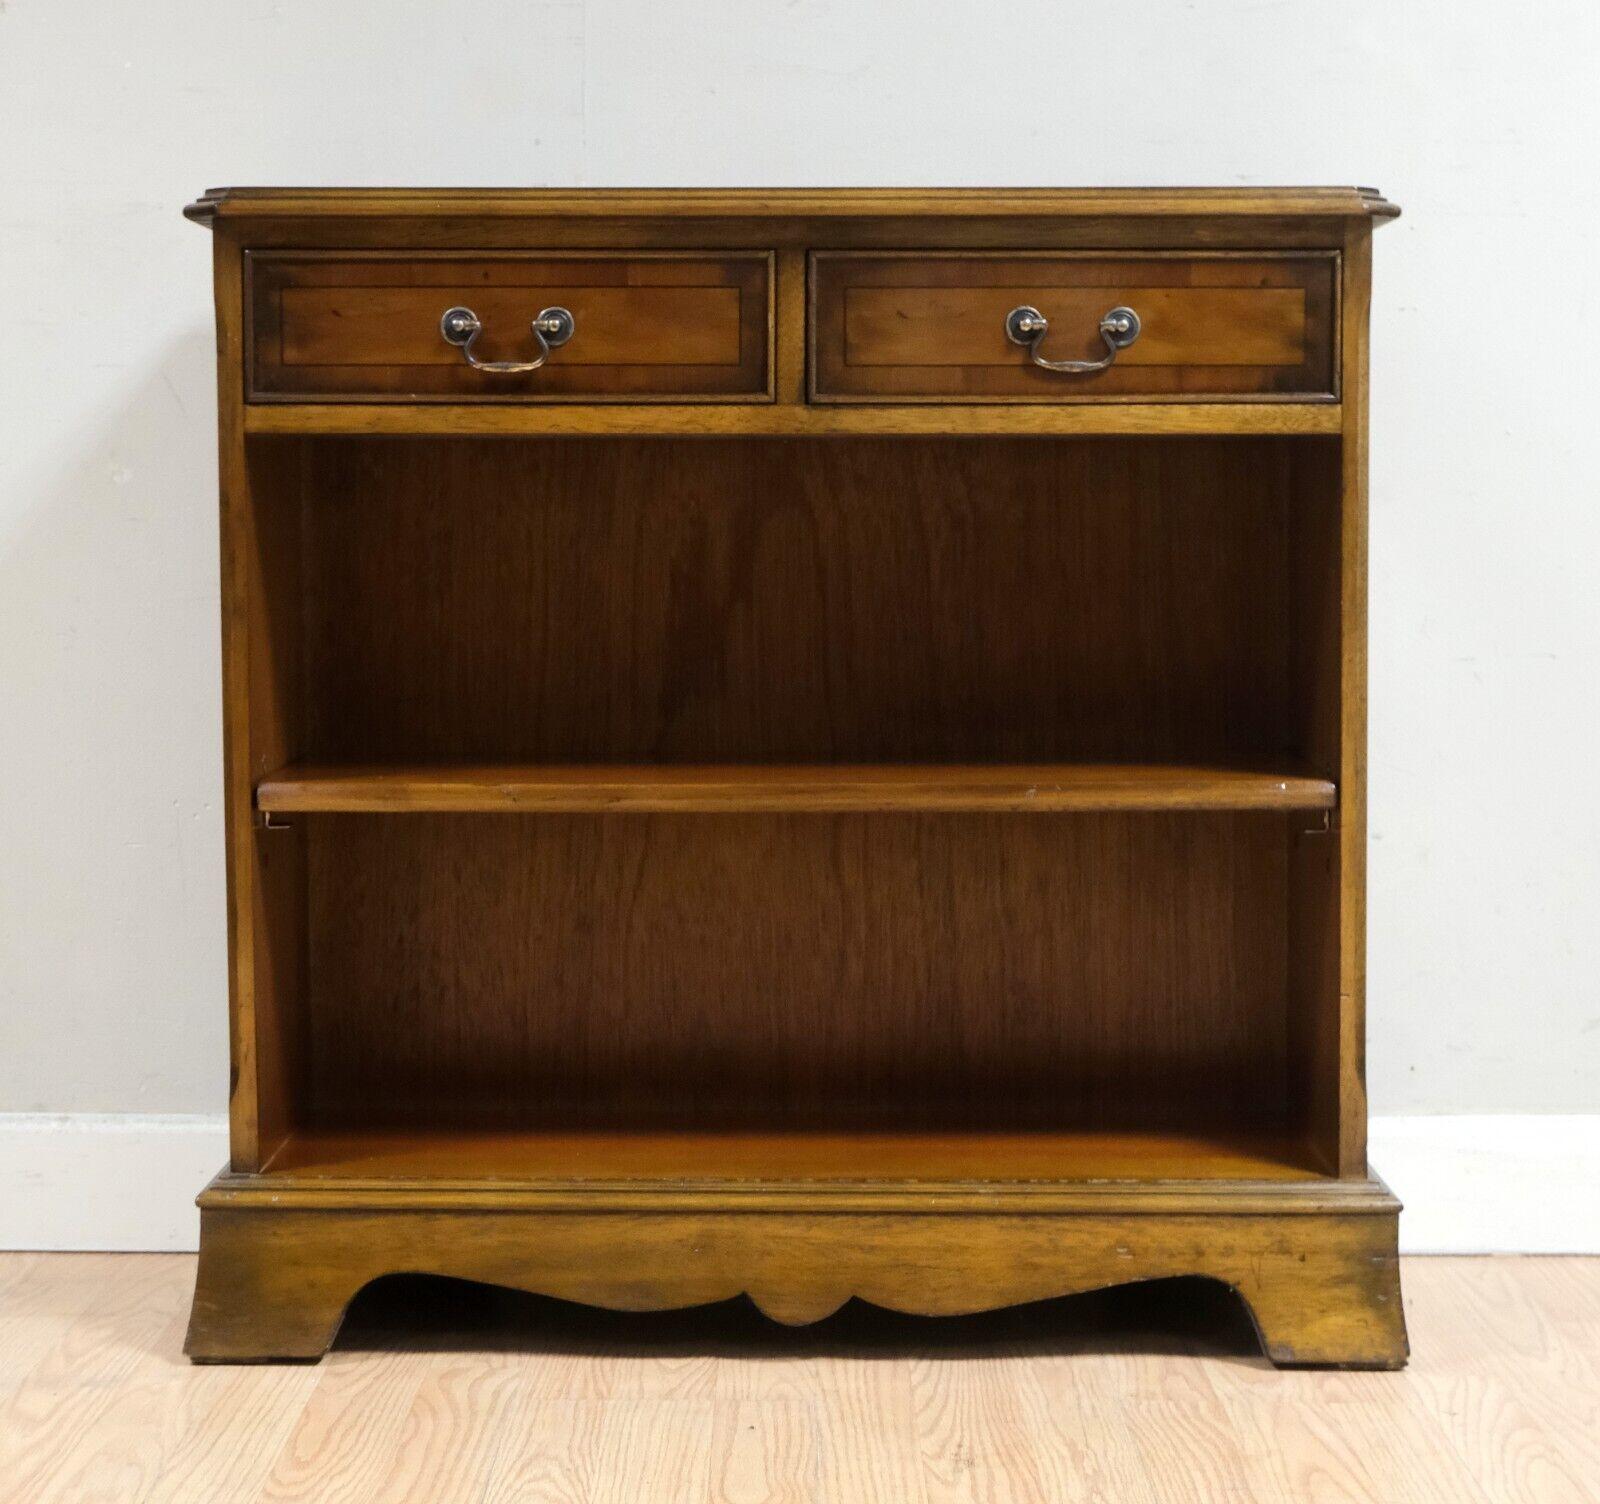 We are delighted to offer for sale this charming vintage Yew wood dwarf open bookcase with a single adjustable shelf. 

This lovely piece is well presented with a pair of good-sized drawers for storage and an adjustable single shelf. It is a well